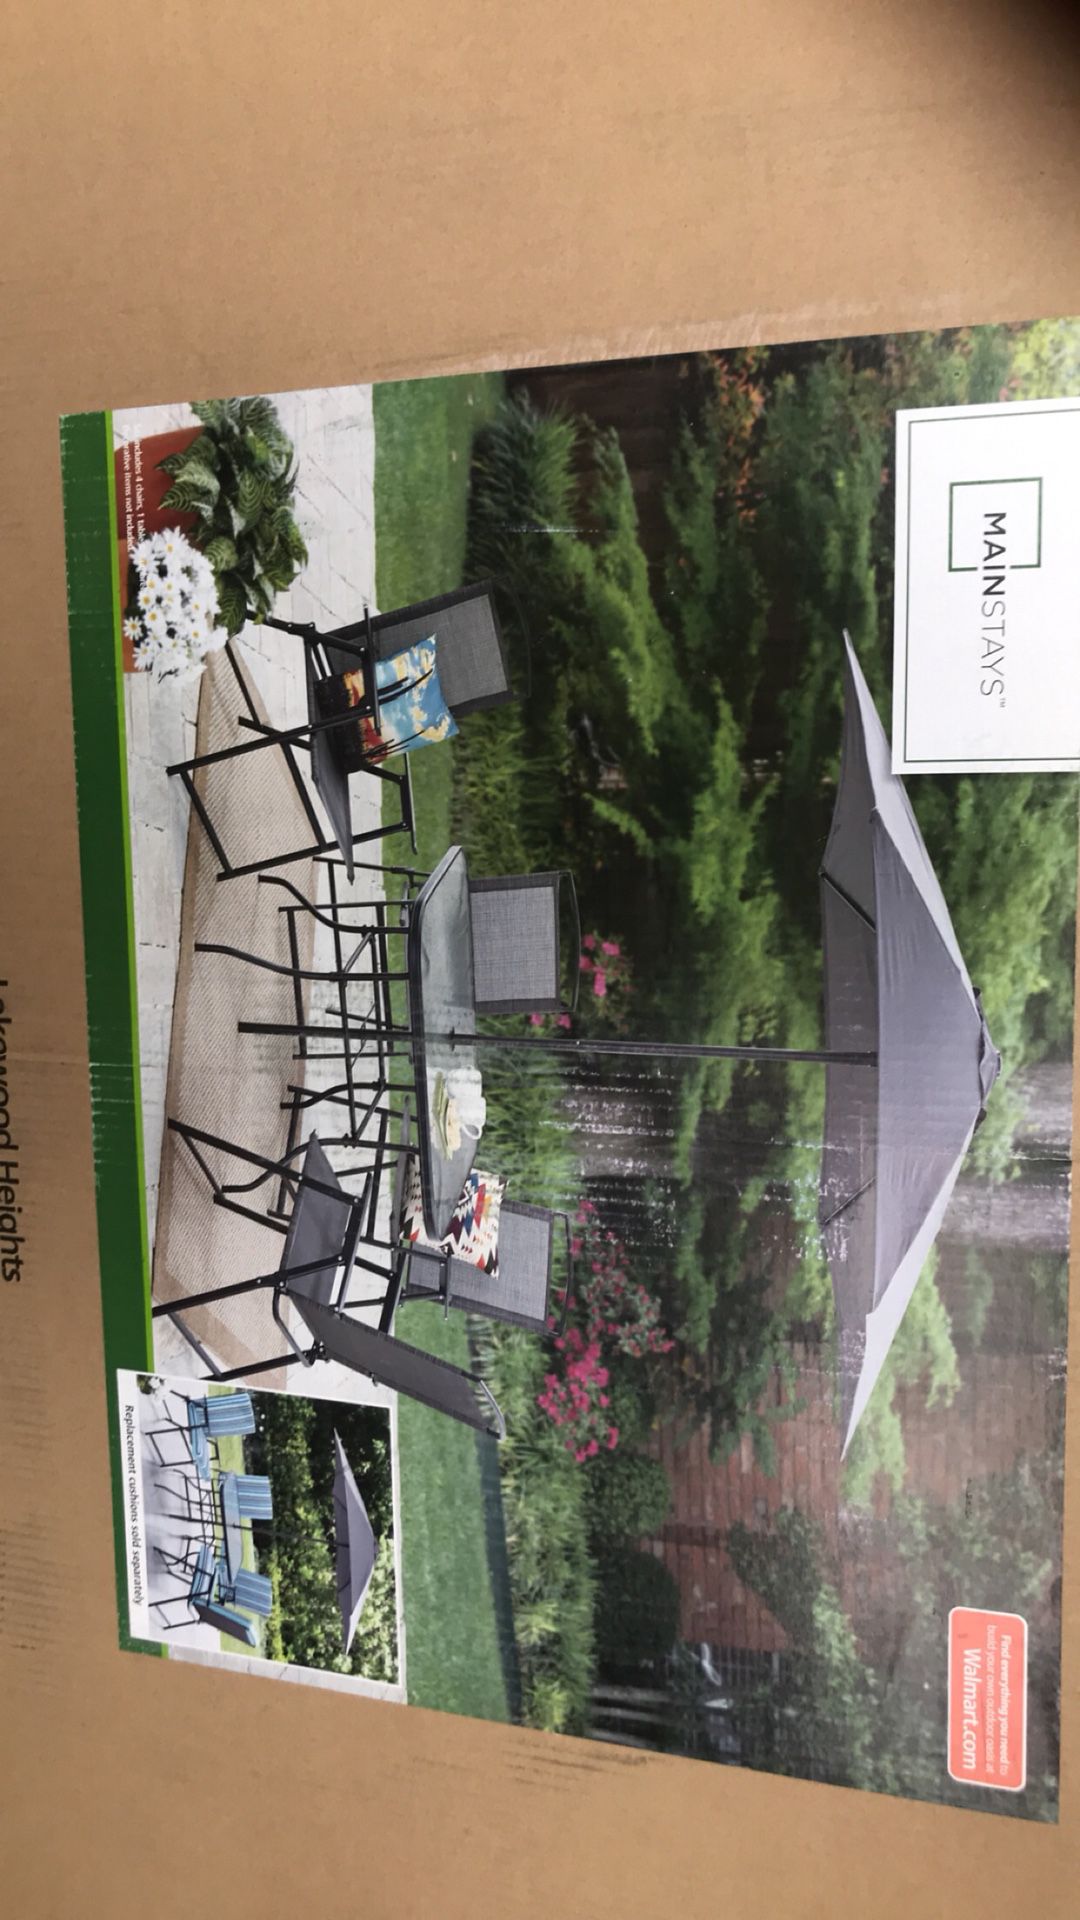 Brand new mainstay patio furniture set